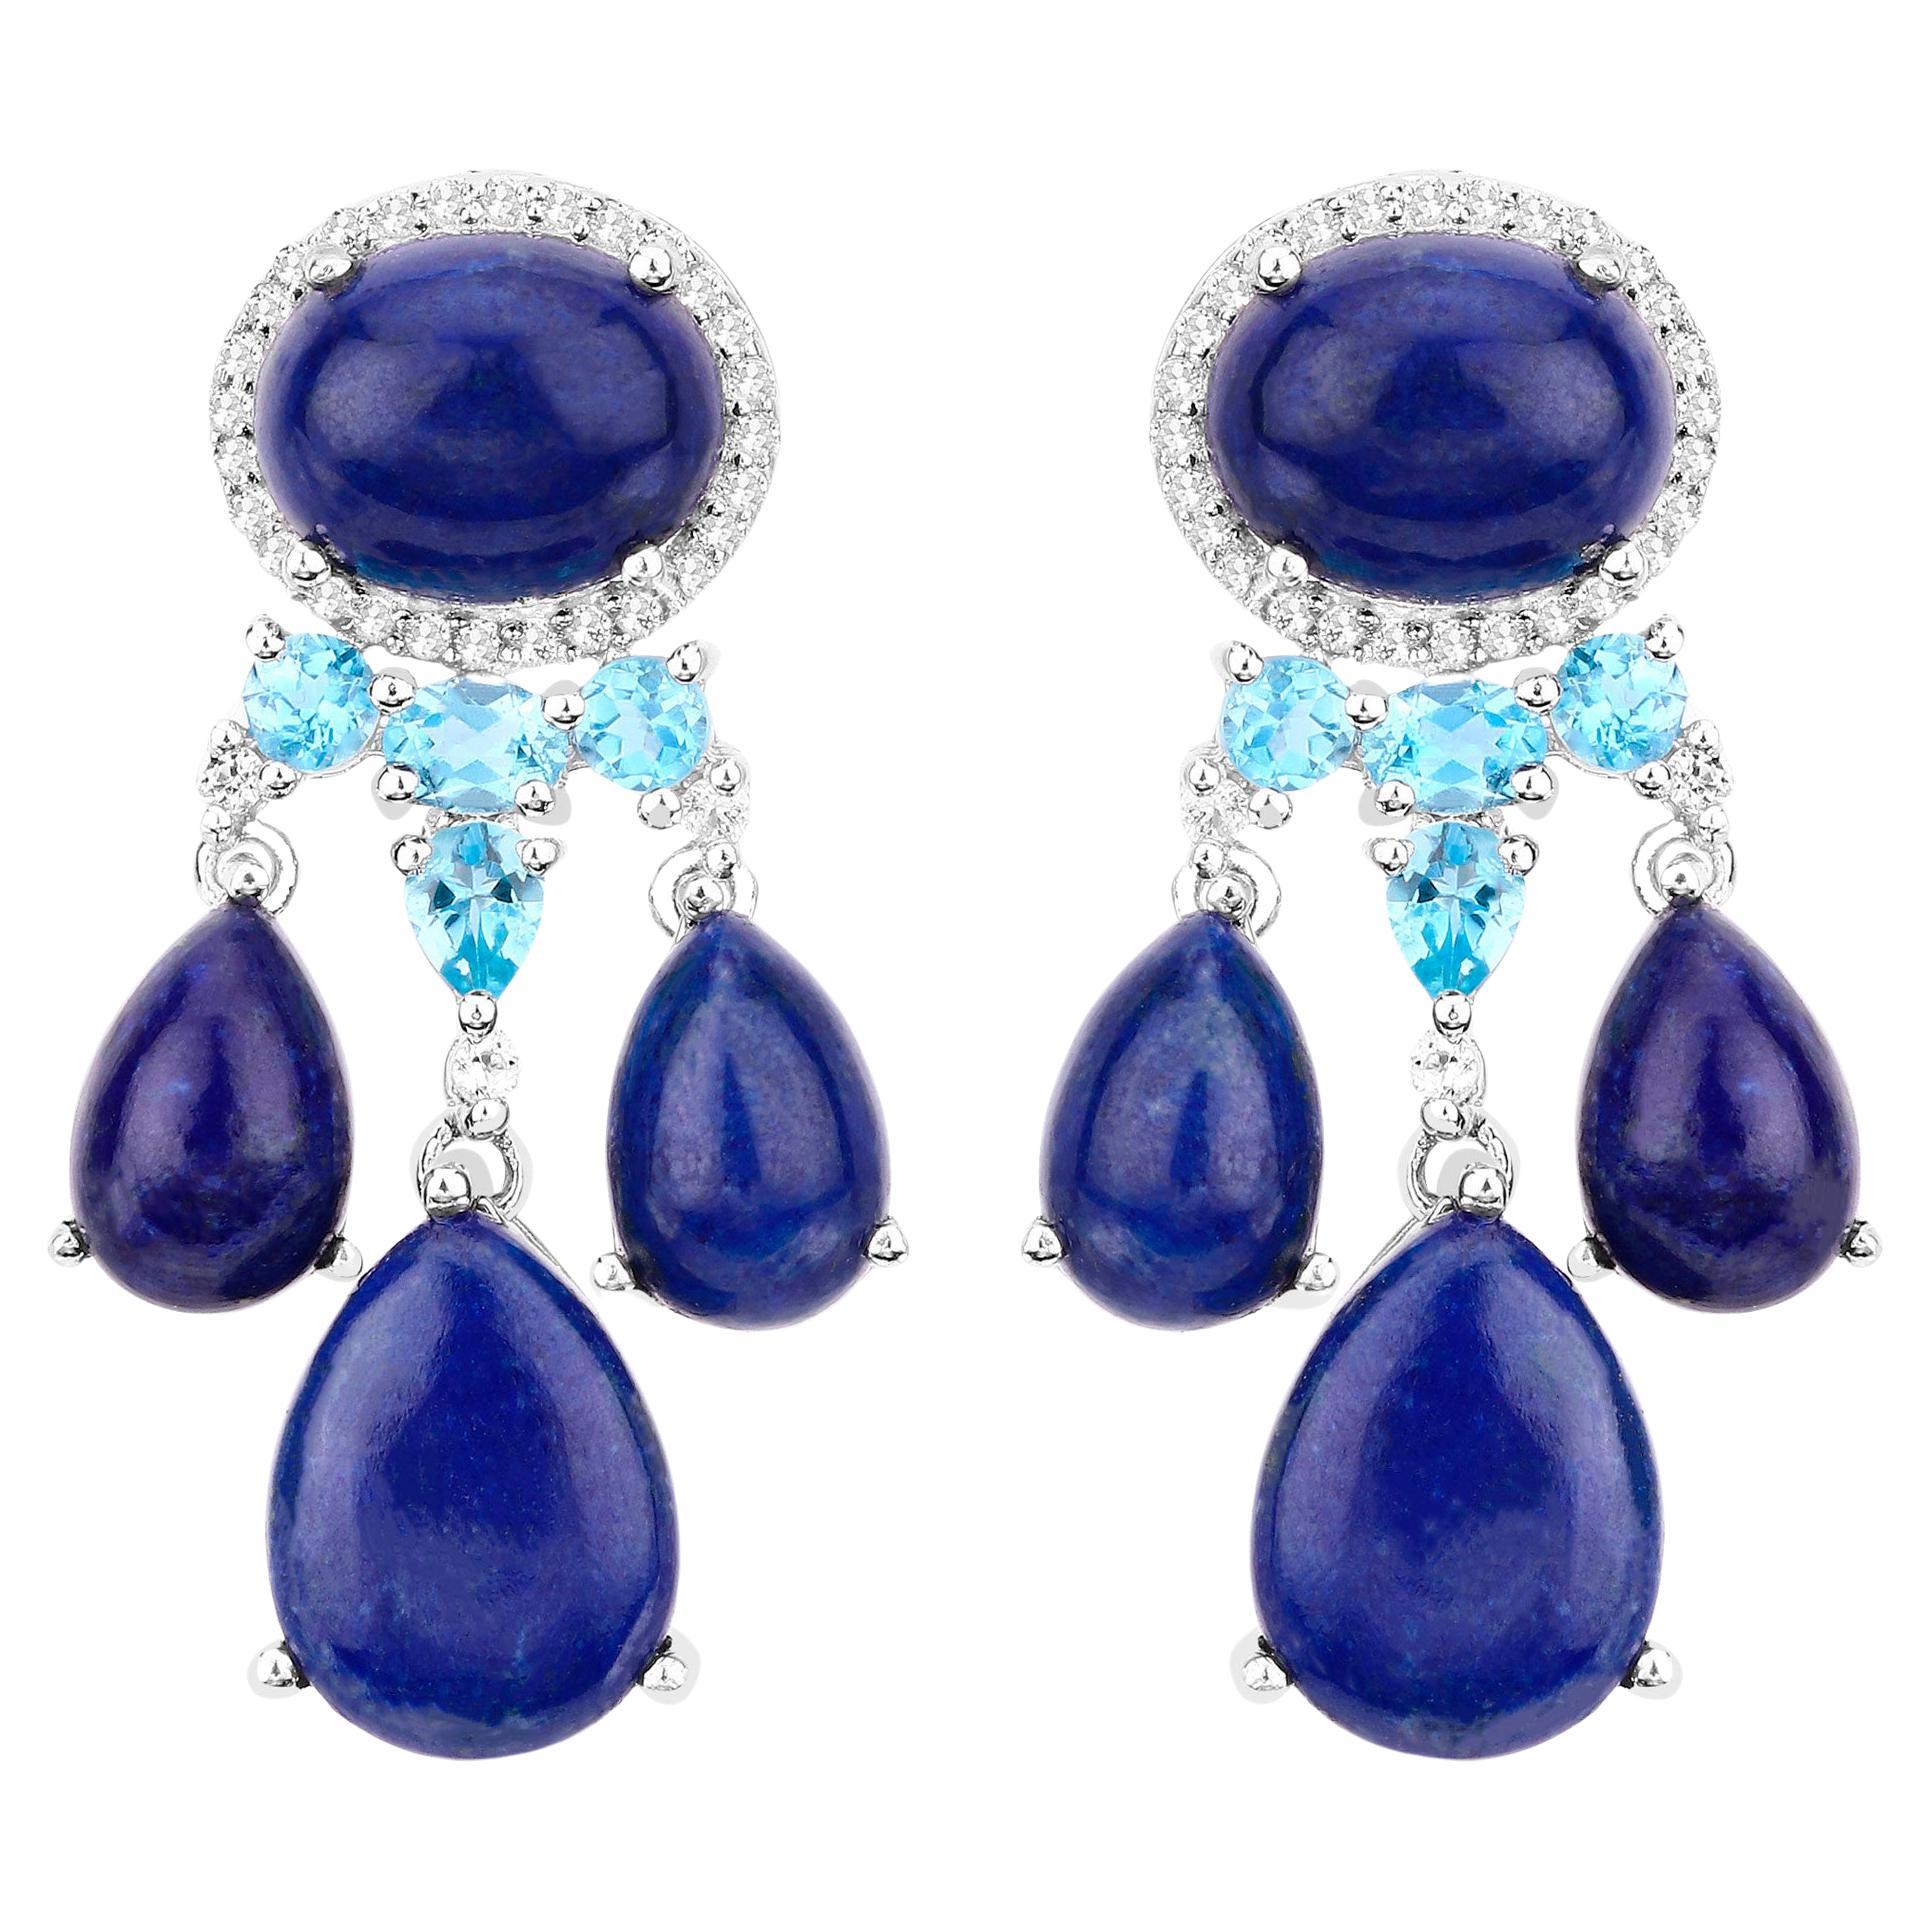 Lapis Lazuli Dangle Earrings With Swiss Blue and White Topazes 23.63 Carats For Sale